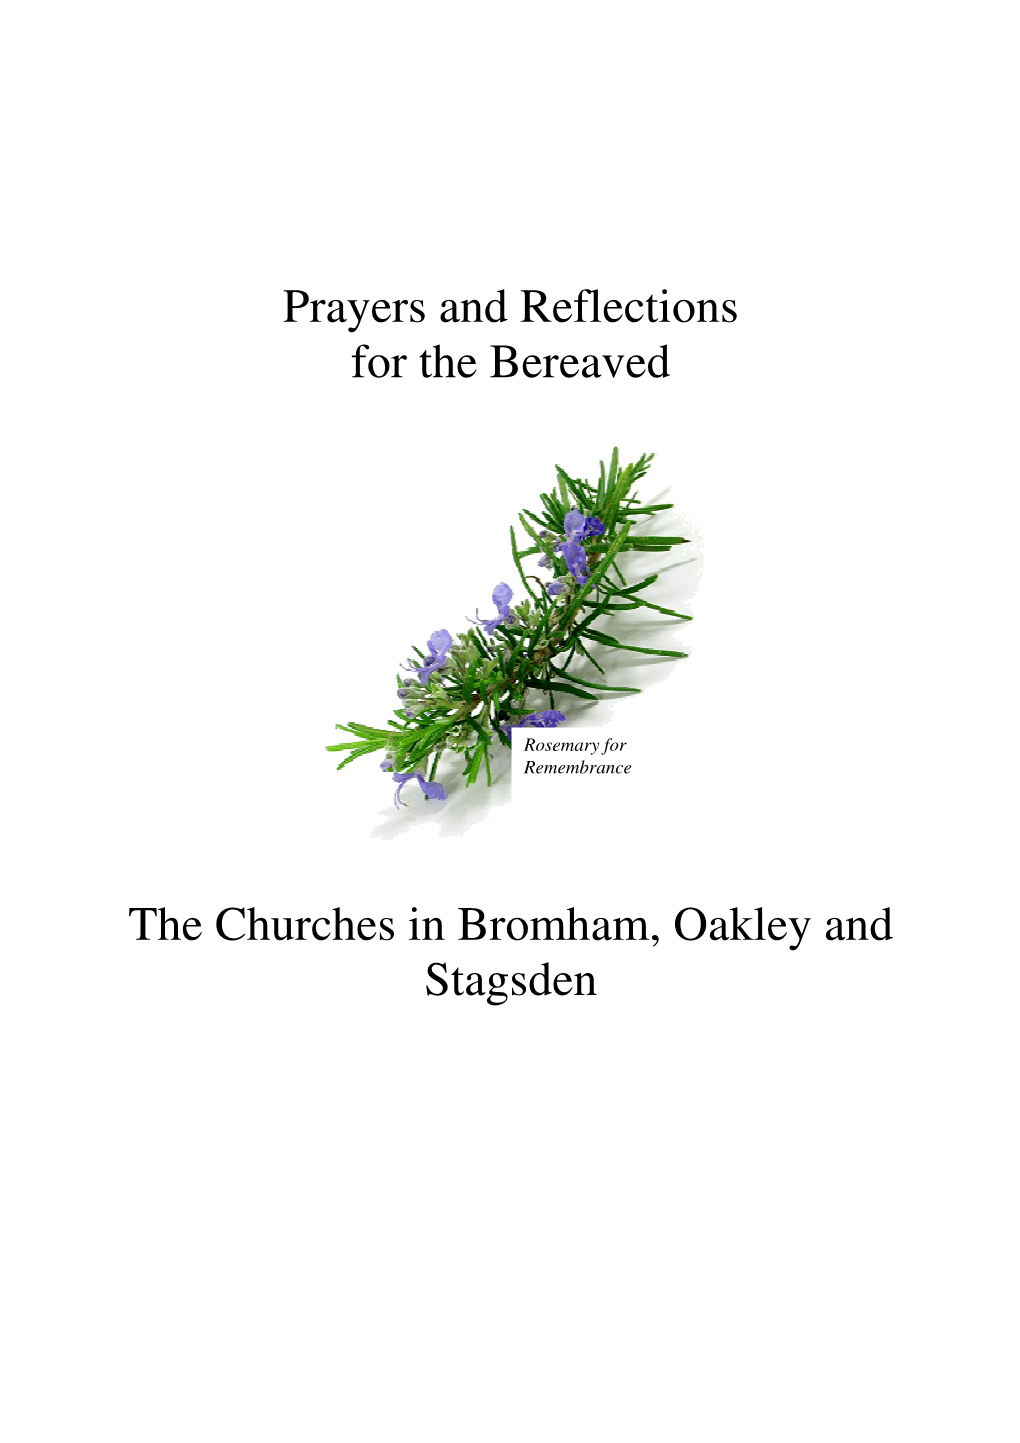 Prayers and Reflections for the Bereaved